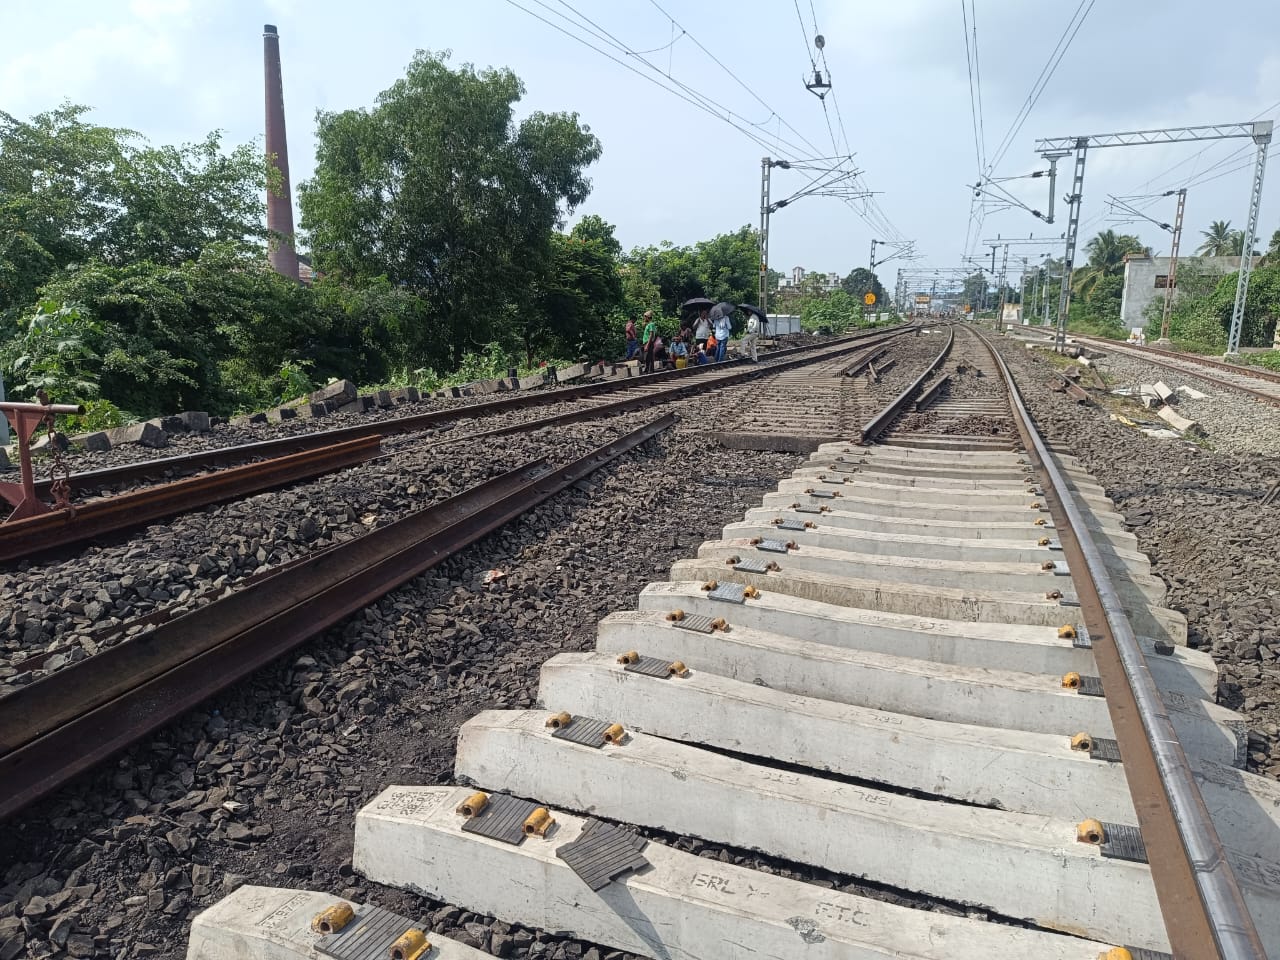 MAJOR MILESTONE: FULL SWING 3RD LINE COMMISSIONING WORK IN RAMPURHAT – CHATRA SECTION